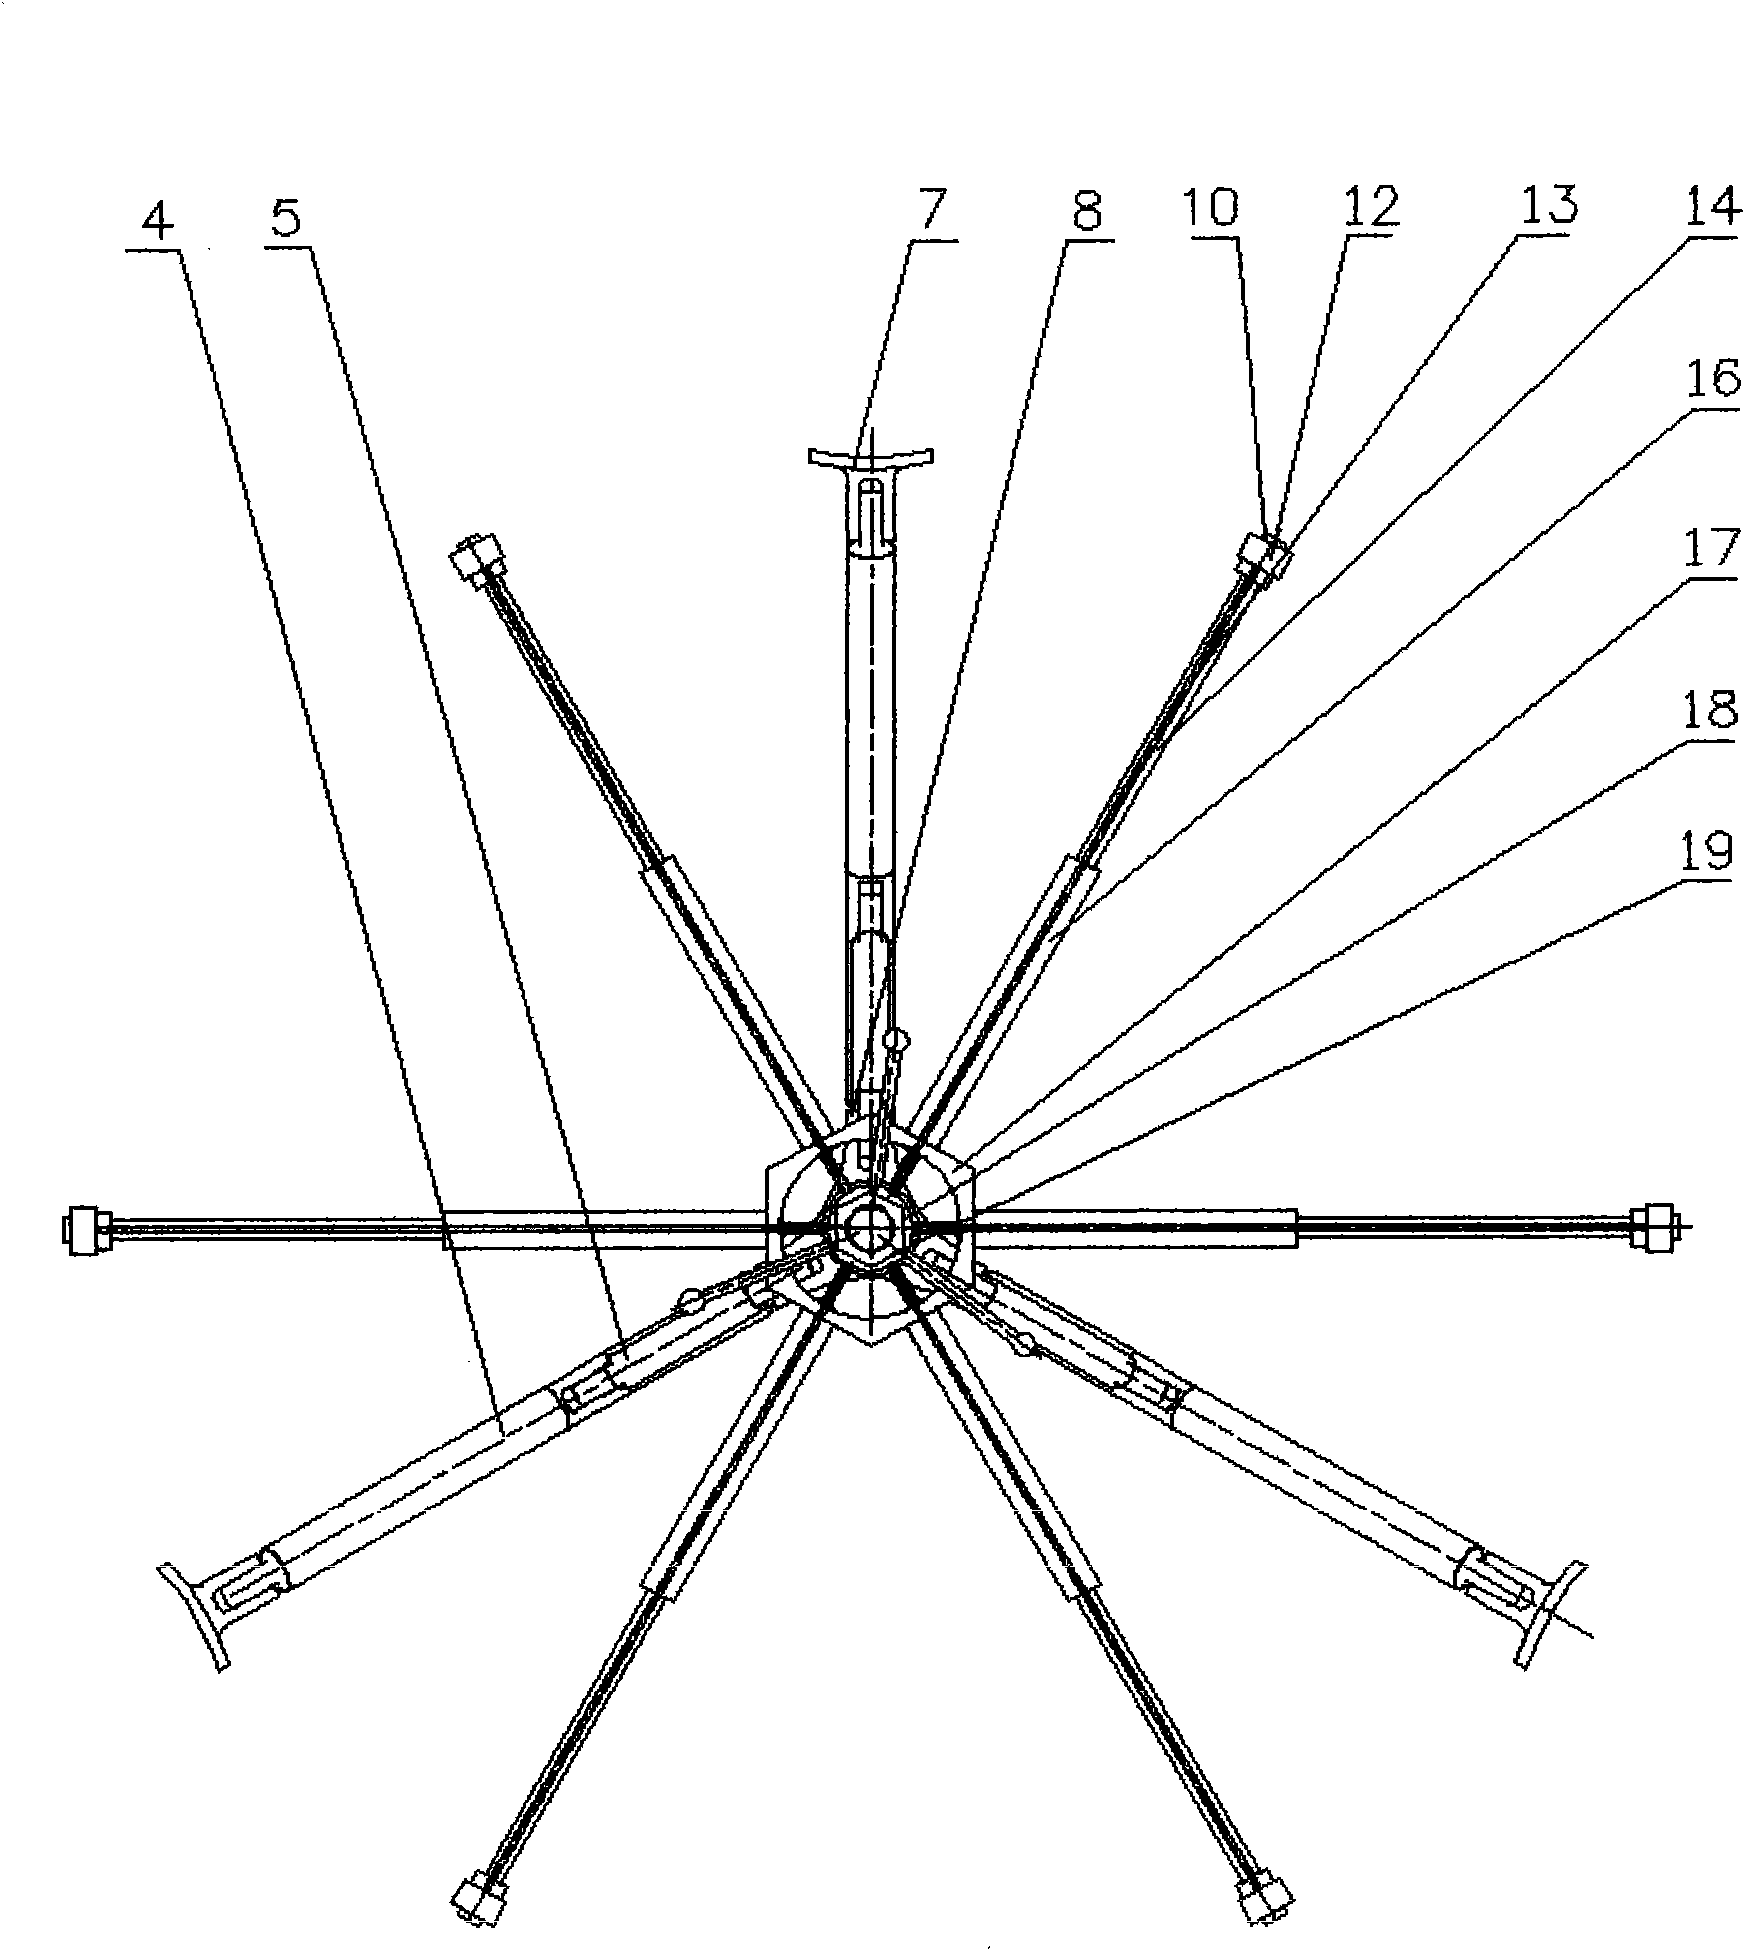 Measuring tool for diameter of adjustable convergence spout